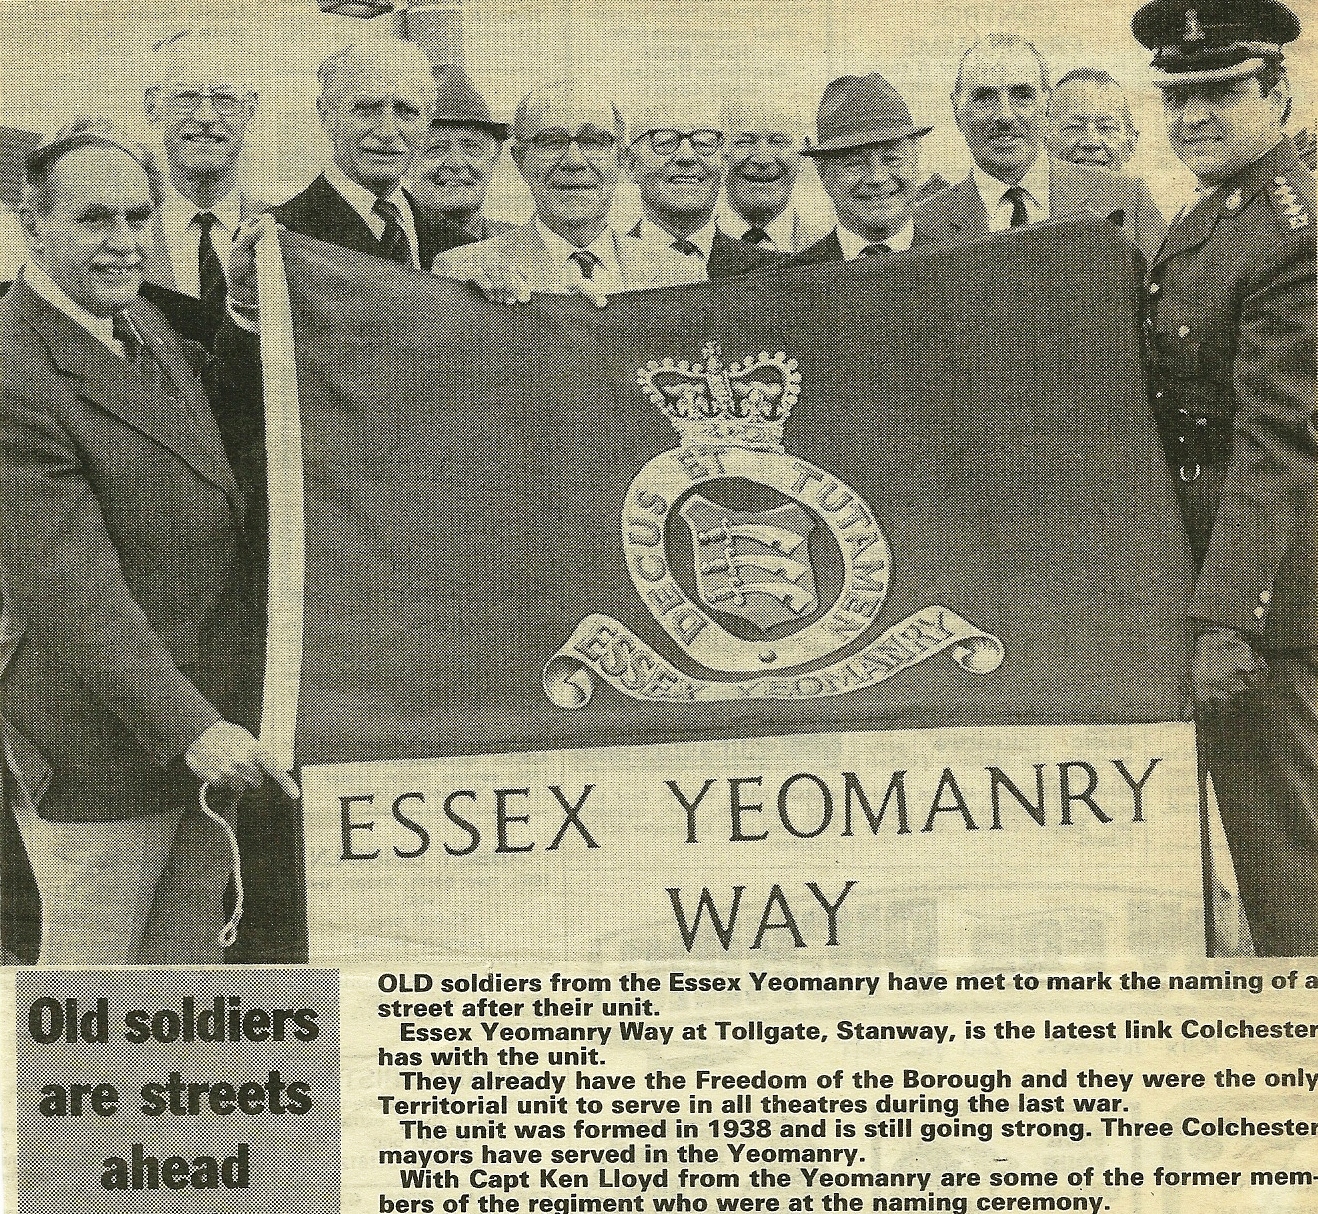 July 1988, Evening Gazette: The unveiling of ‘Essex Yeomanry Way’, Colchester. LtoR: Messrs: Parsonson; Johnson; Bews; Underdown; Avis; Brooks; 3 x ?; Eastall; and Captain Ken Lloyd. Courtesy/© of The Felix R. Johnson Collection.